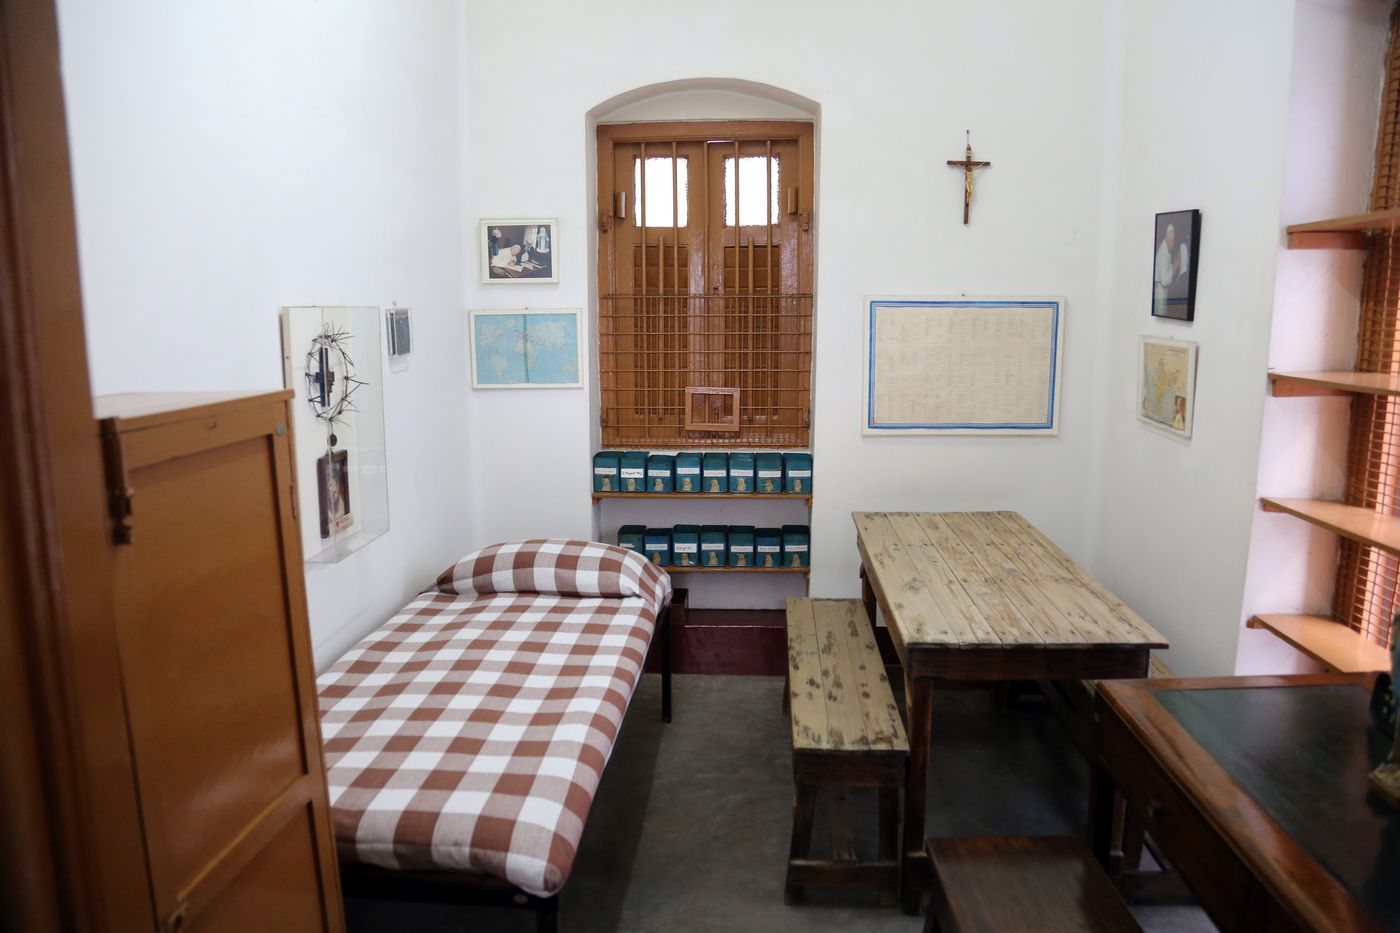 The simple, modest room at Mother House where Mother Teresa lived and was buried after her death